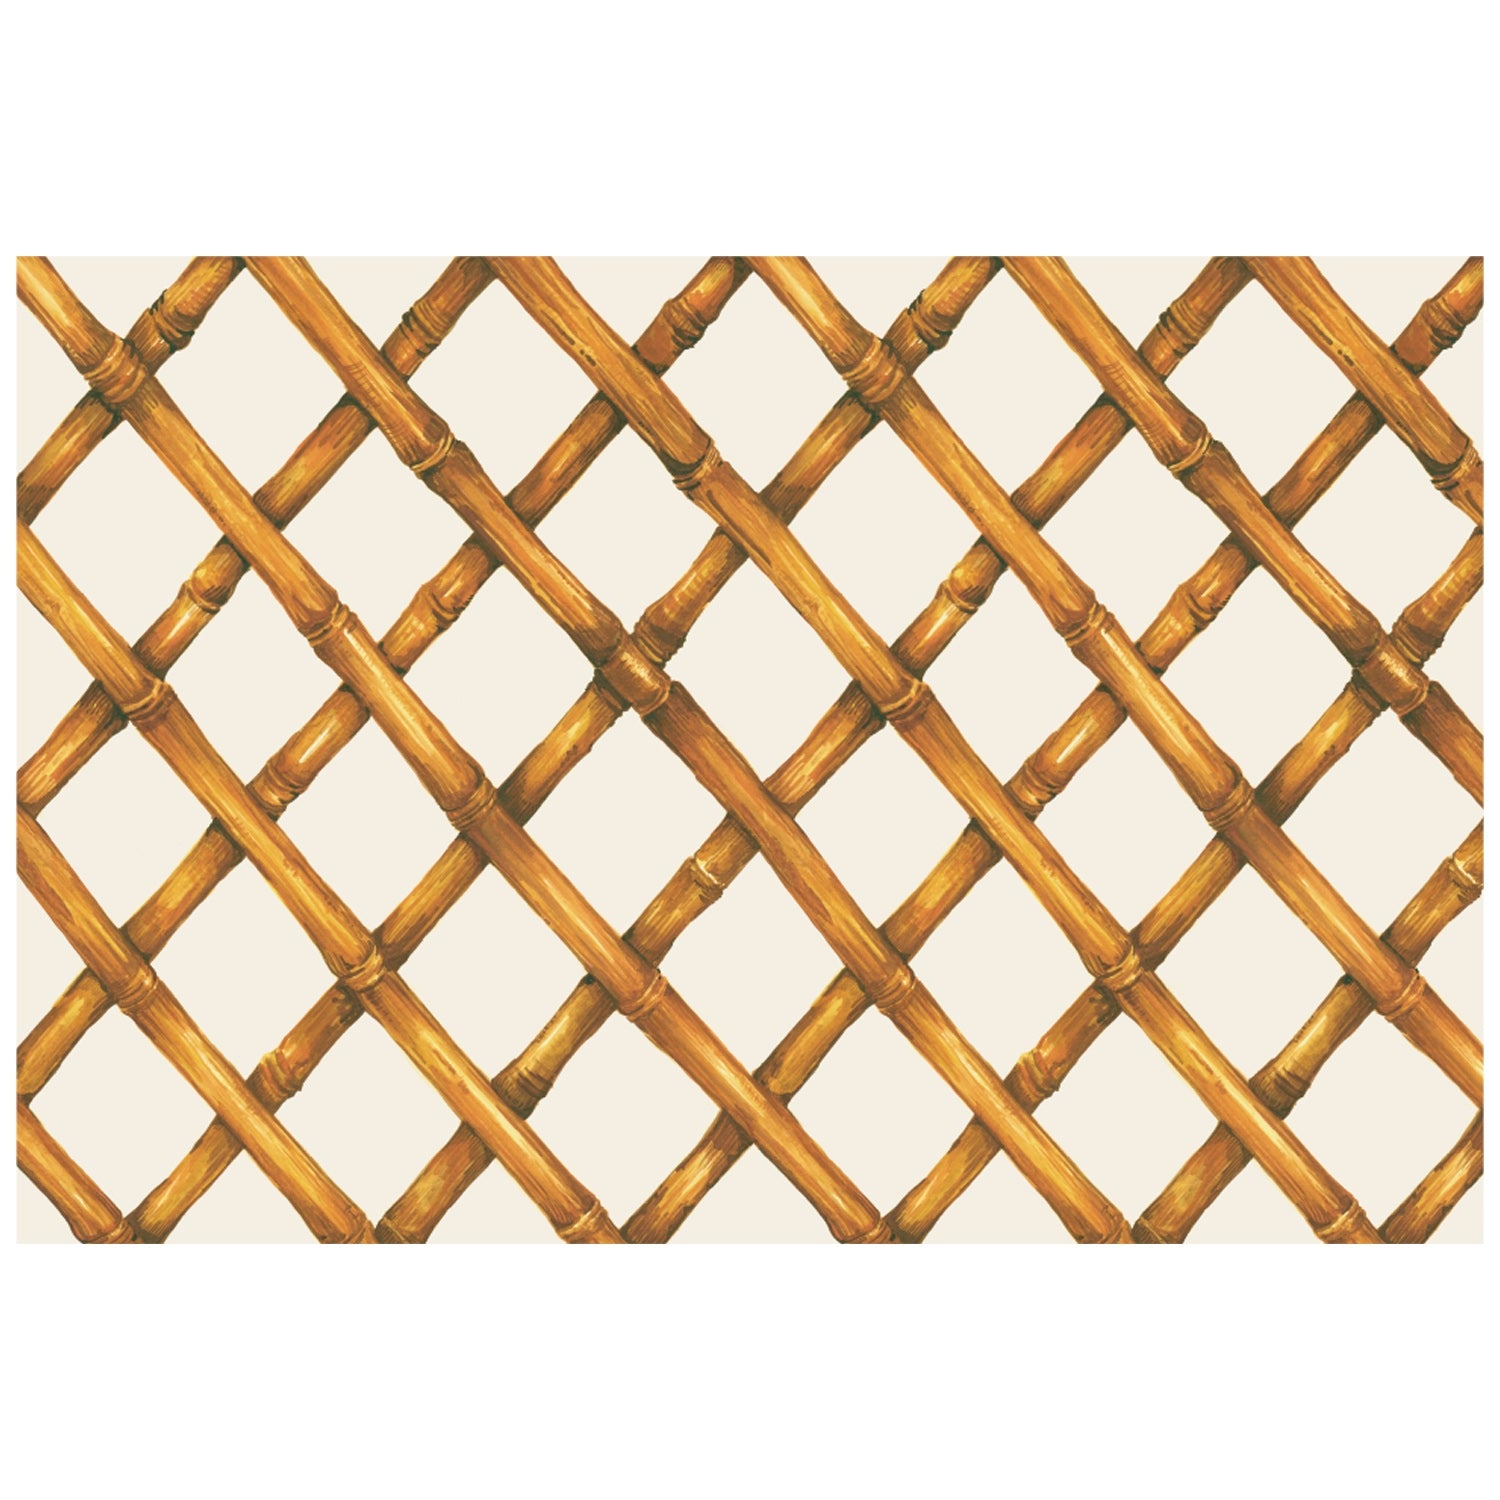 A diagonal woven bamboo pattern in tan on a white background.